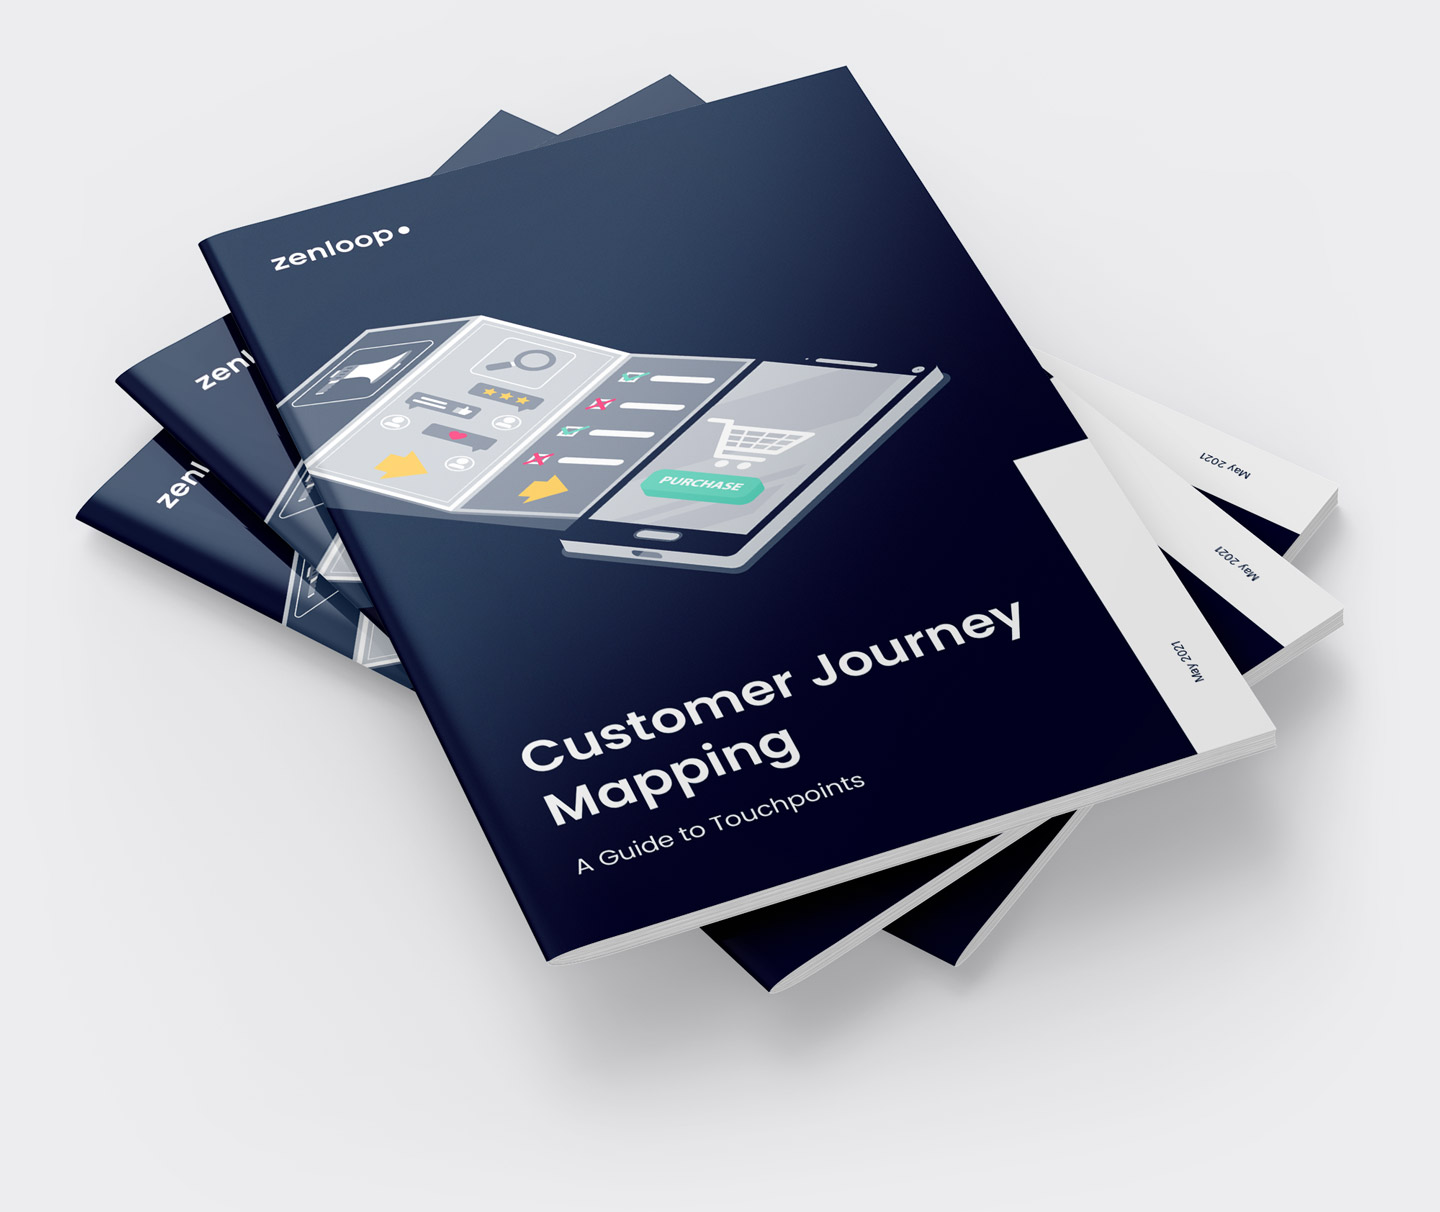 Customer Journey Mapping – a Guide to Touchpoints